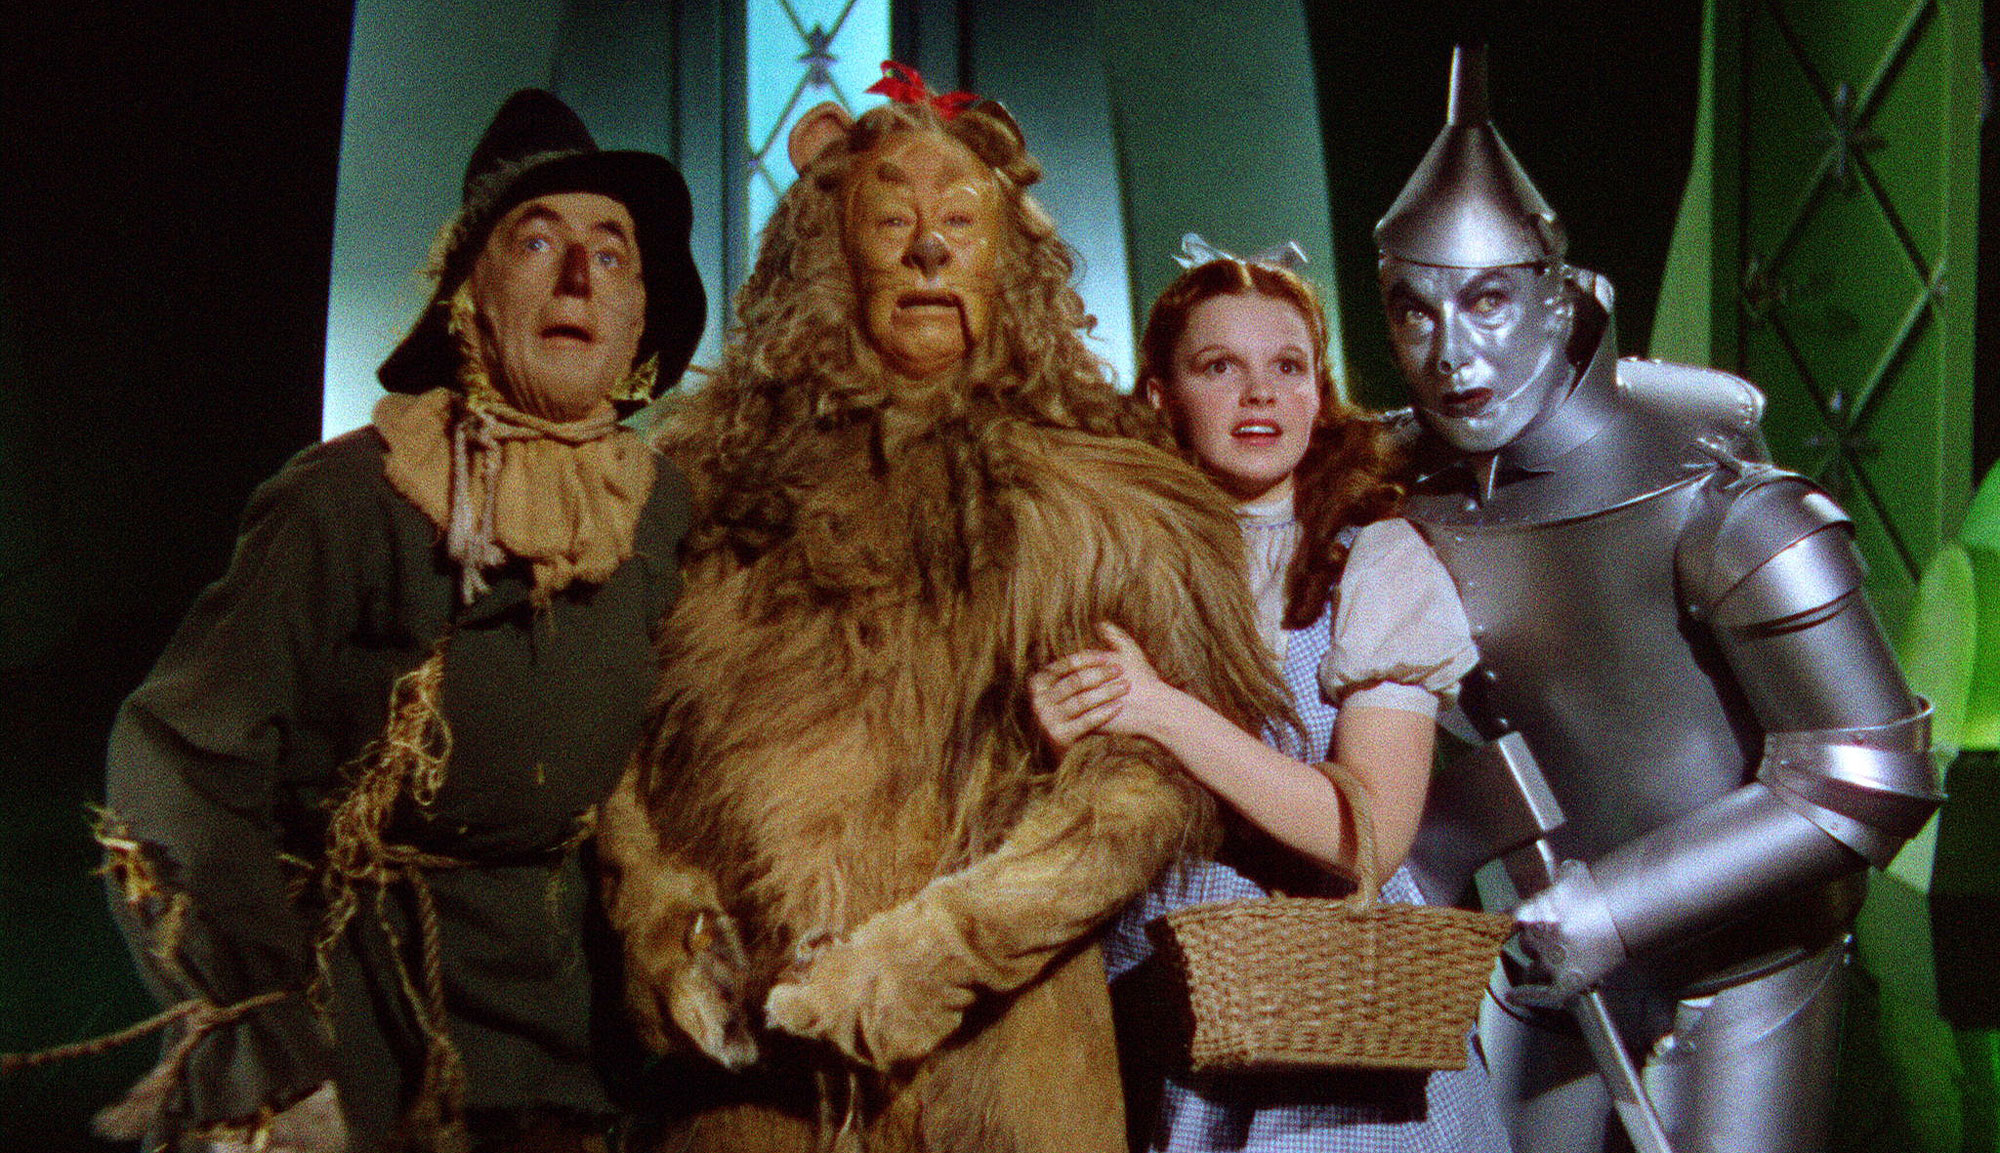 Judy Garland in "The Wizard of Oz"